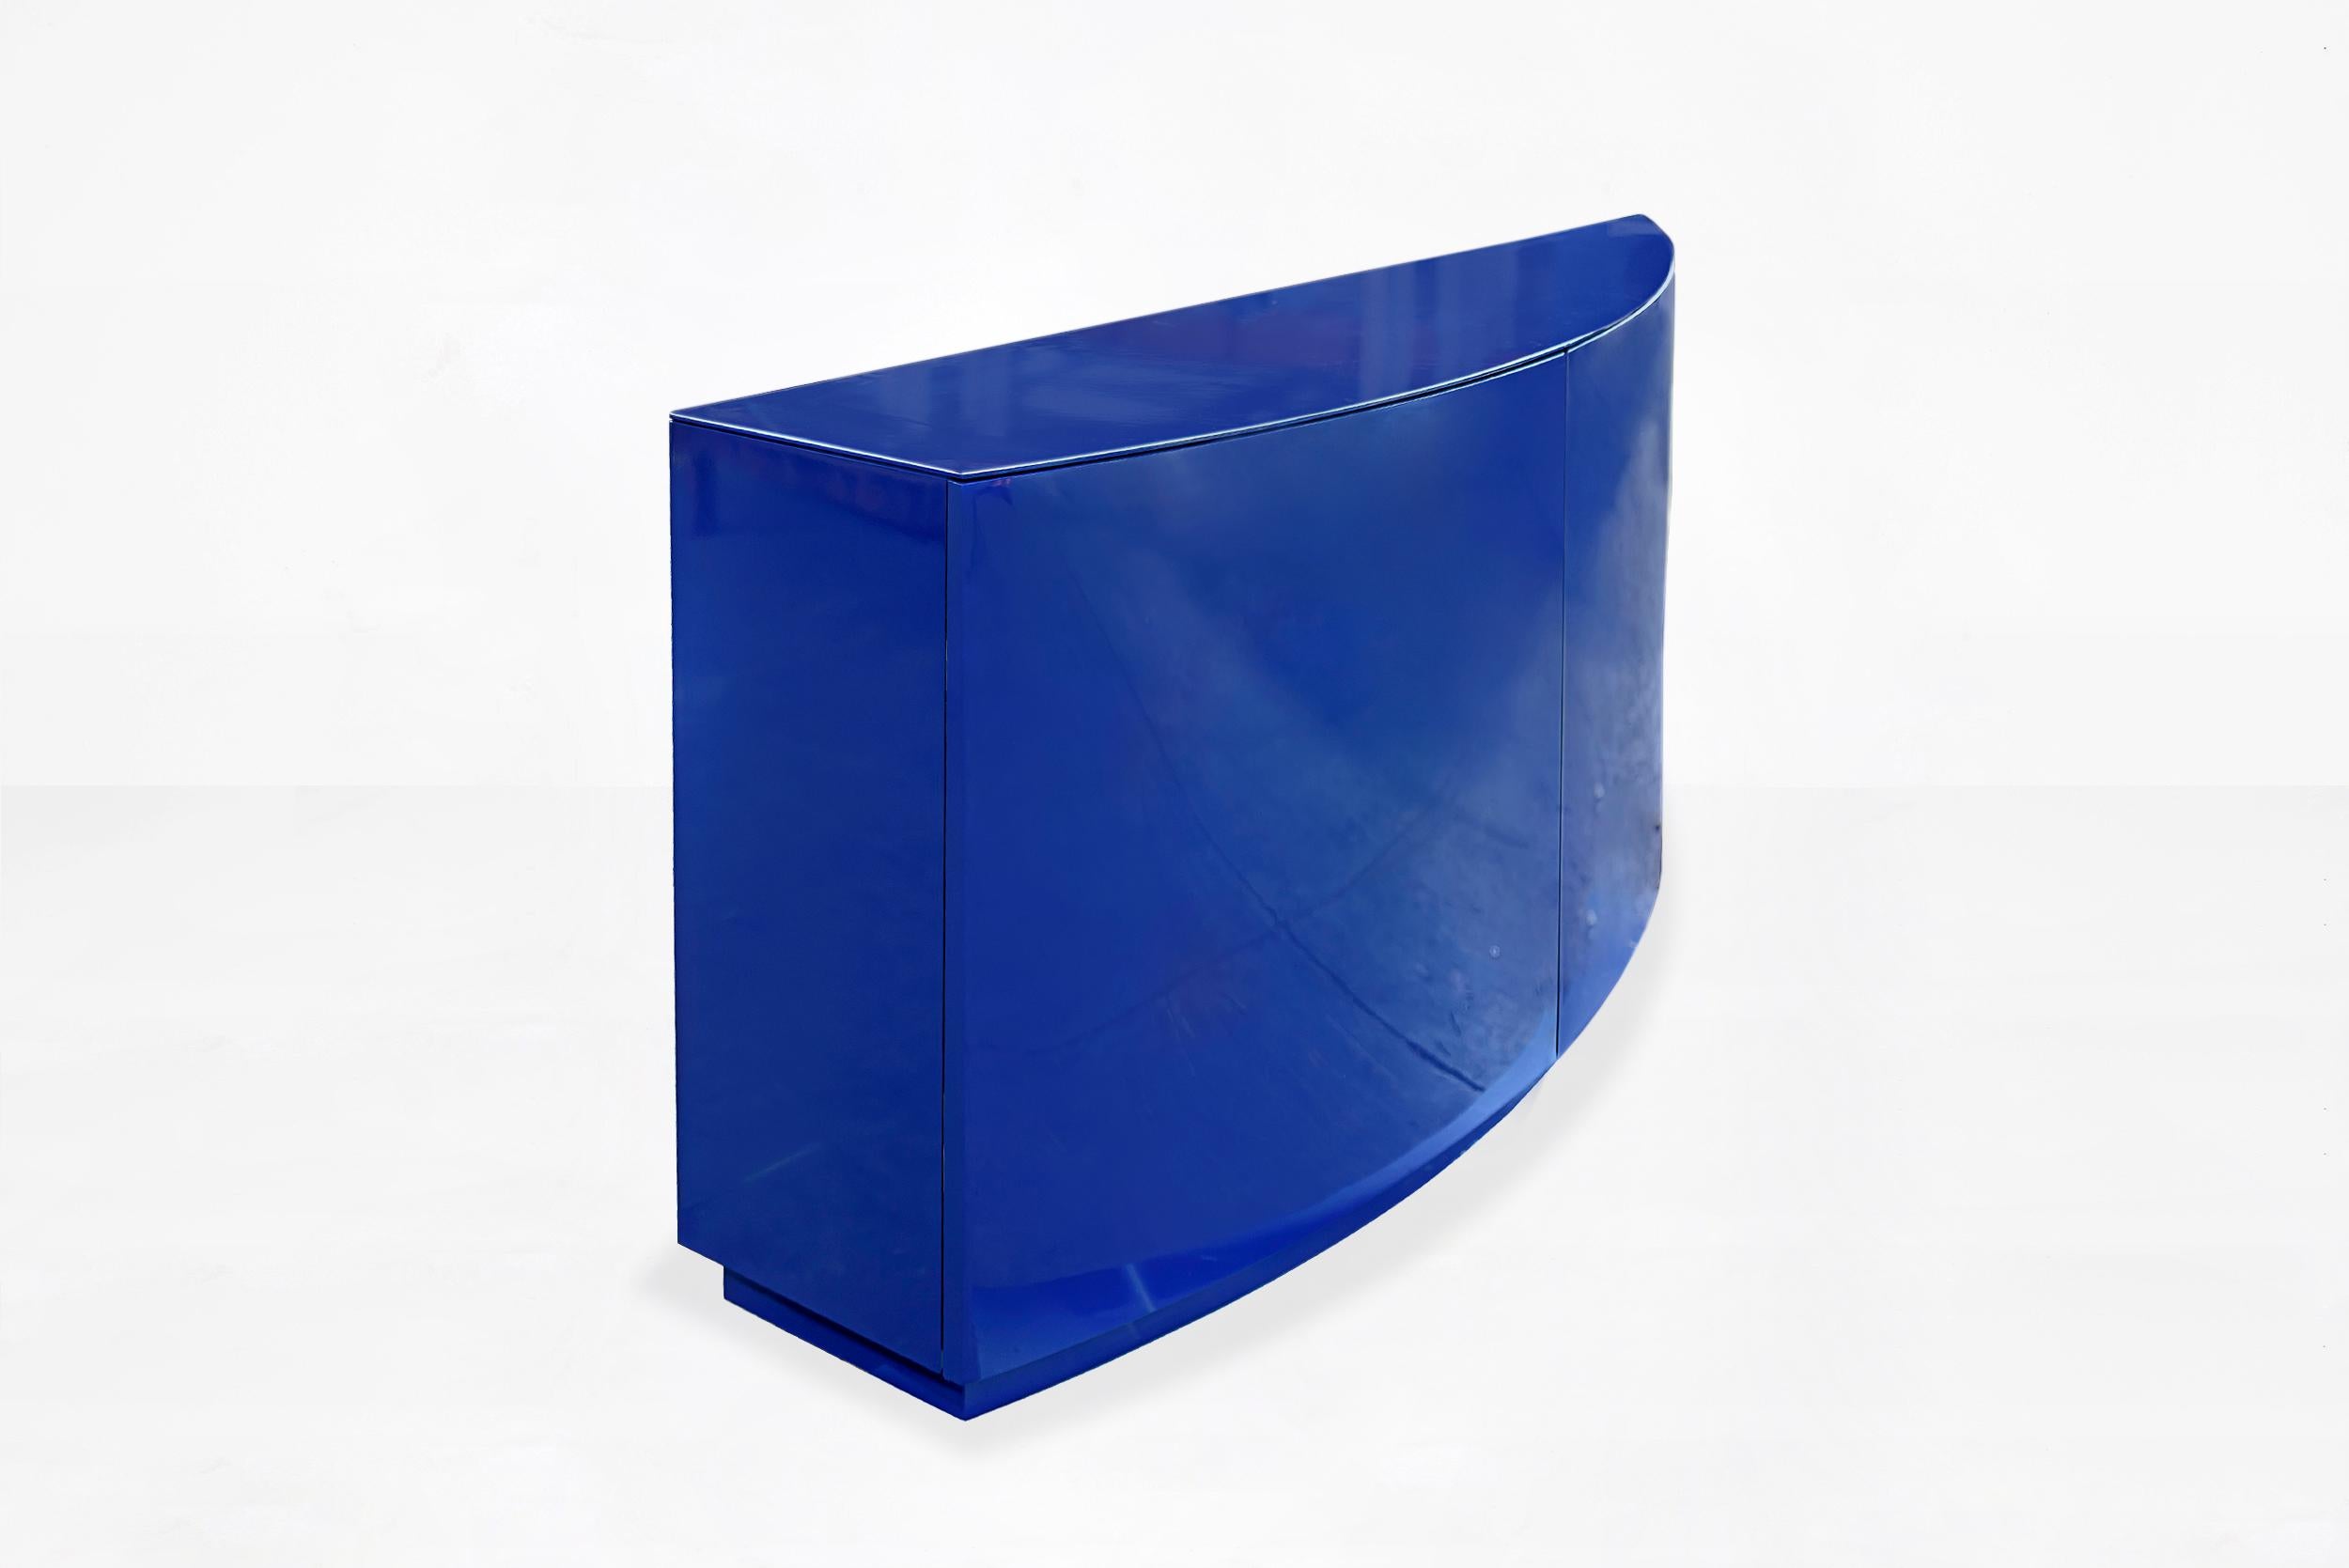 Muller Van Severen
Buffet
Manufactured by Muller Van Severen
Barcelona, 2019
Lacquered steel
Produced for Side Gallery, Barcelona 

Measurements:
200 cm x 50 x 90 H cm
78.74 in x 19.68 in x 35.43 H in

Edition
Limited edition of 7 +